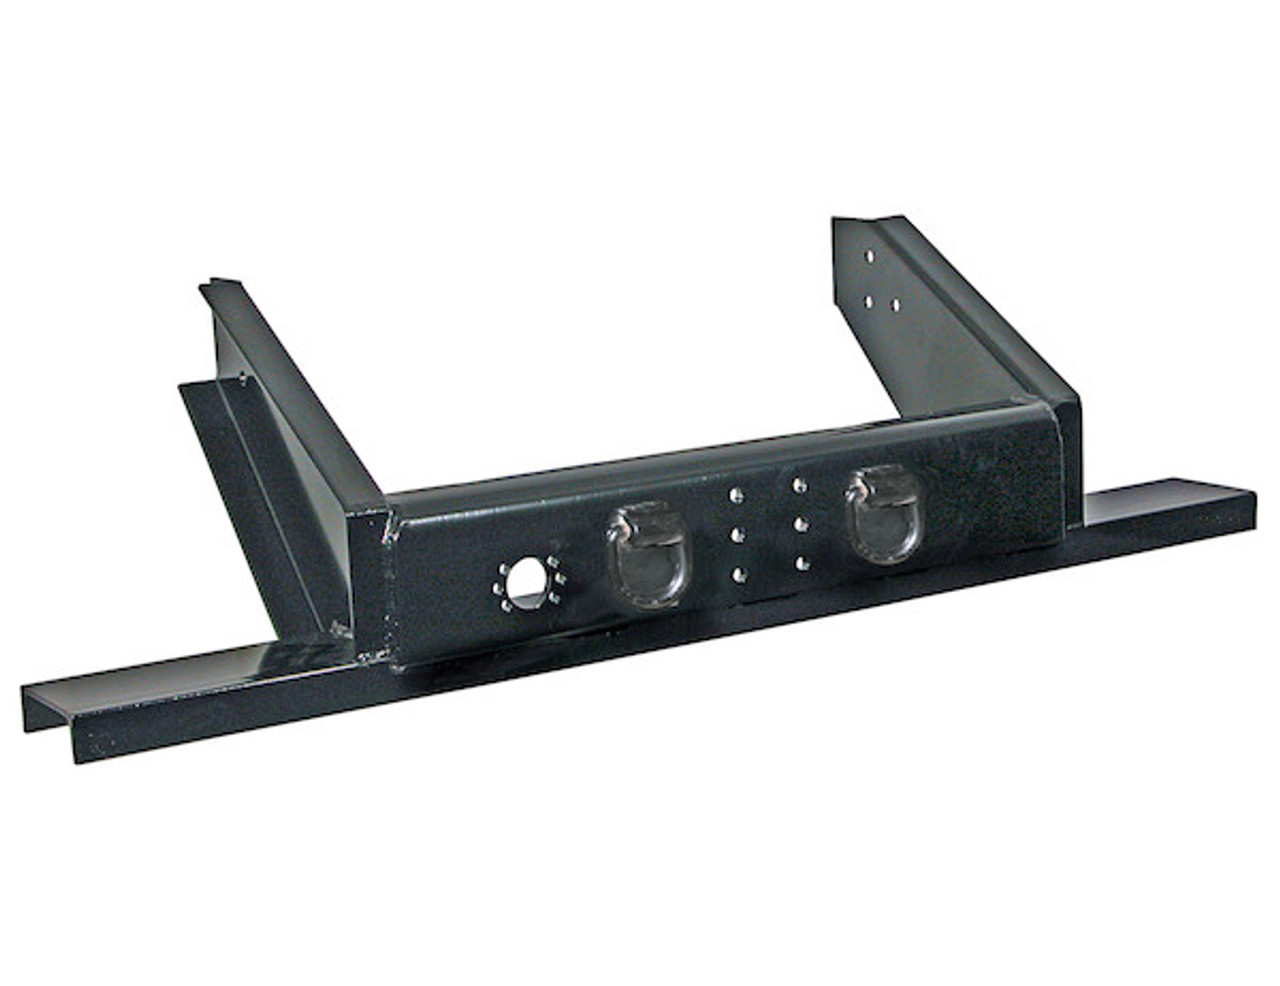 1809050 - Flatbed/Flatbed Dump Hitch Plate Bumper For Pintle Mount ...